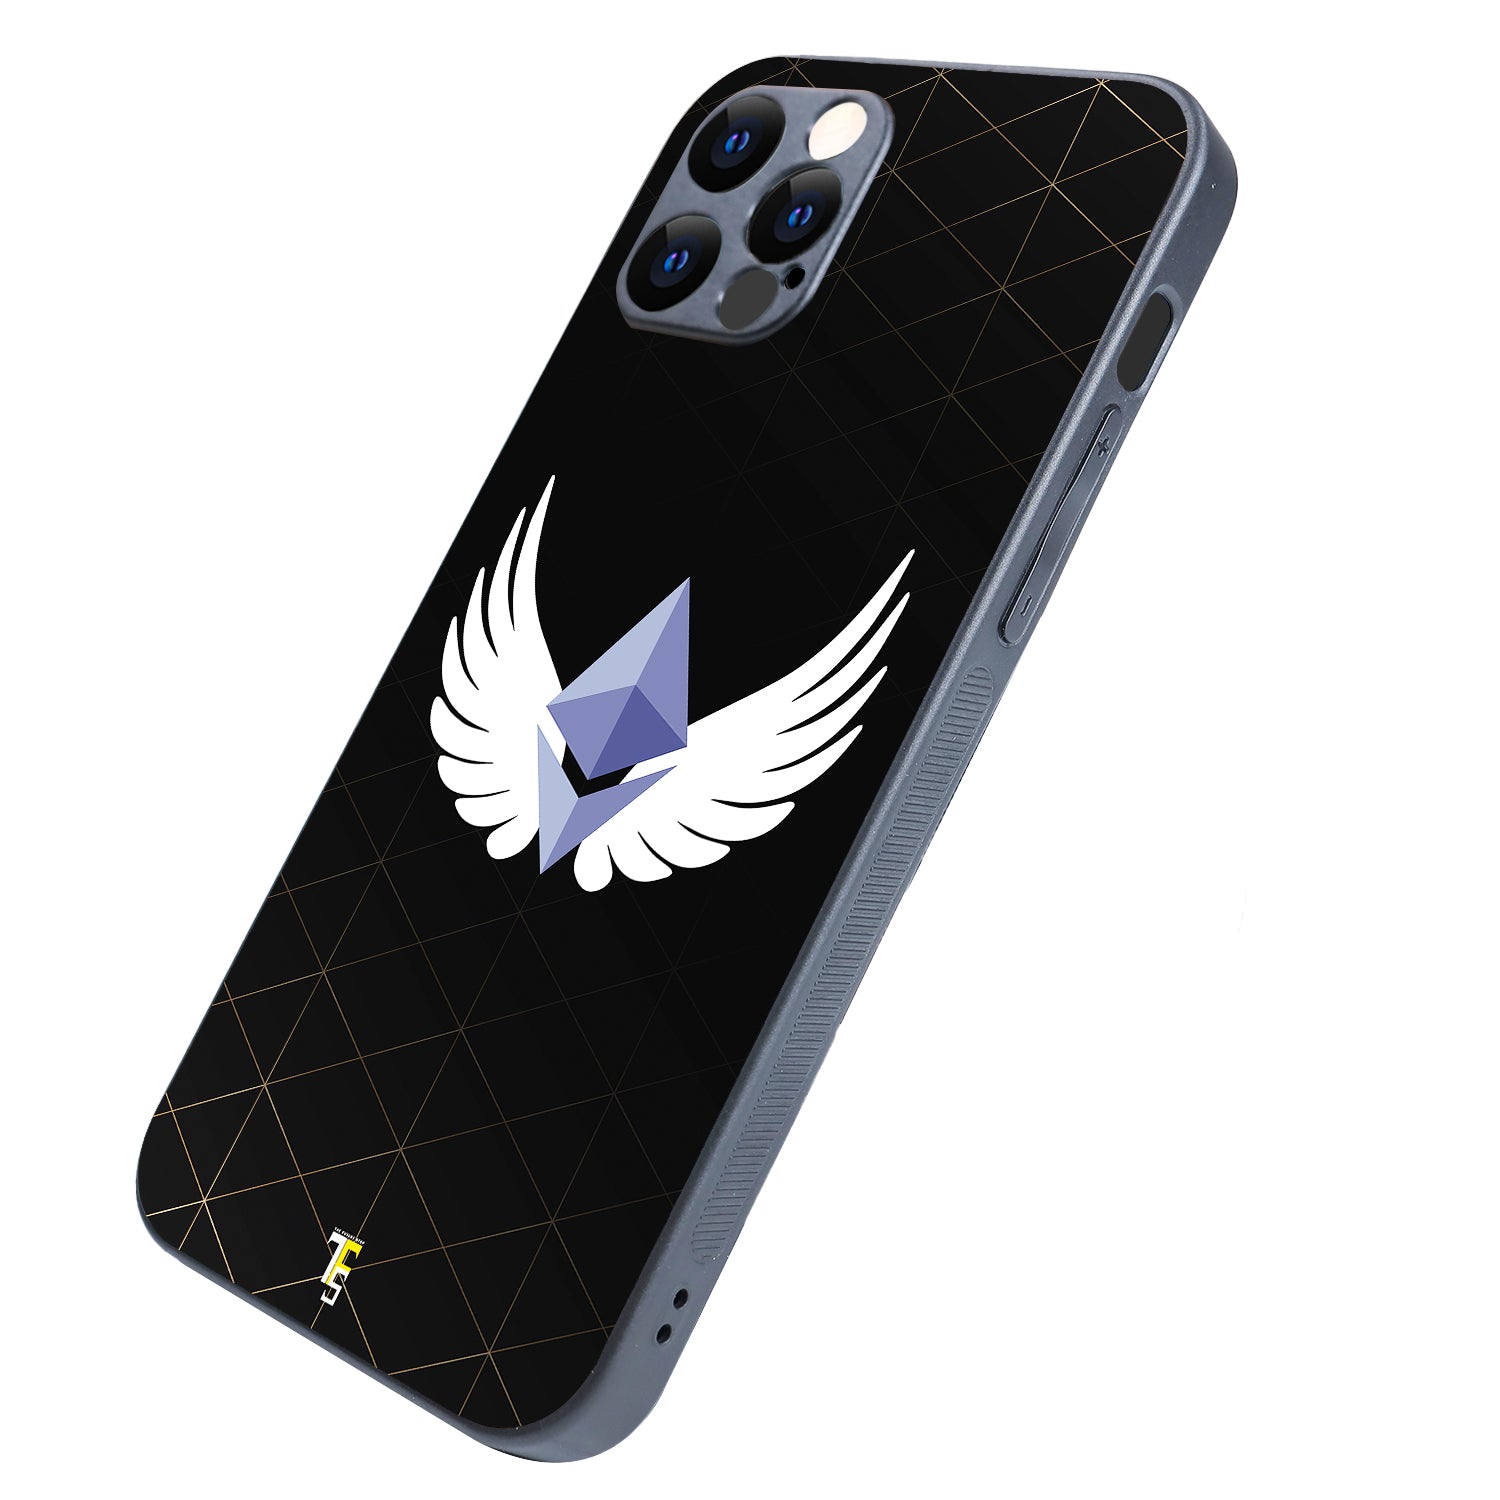 Ethereum Wings Trading iPhone 12 Pro Case